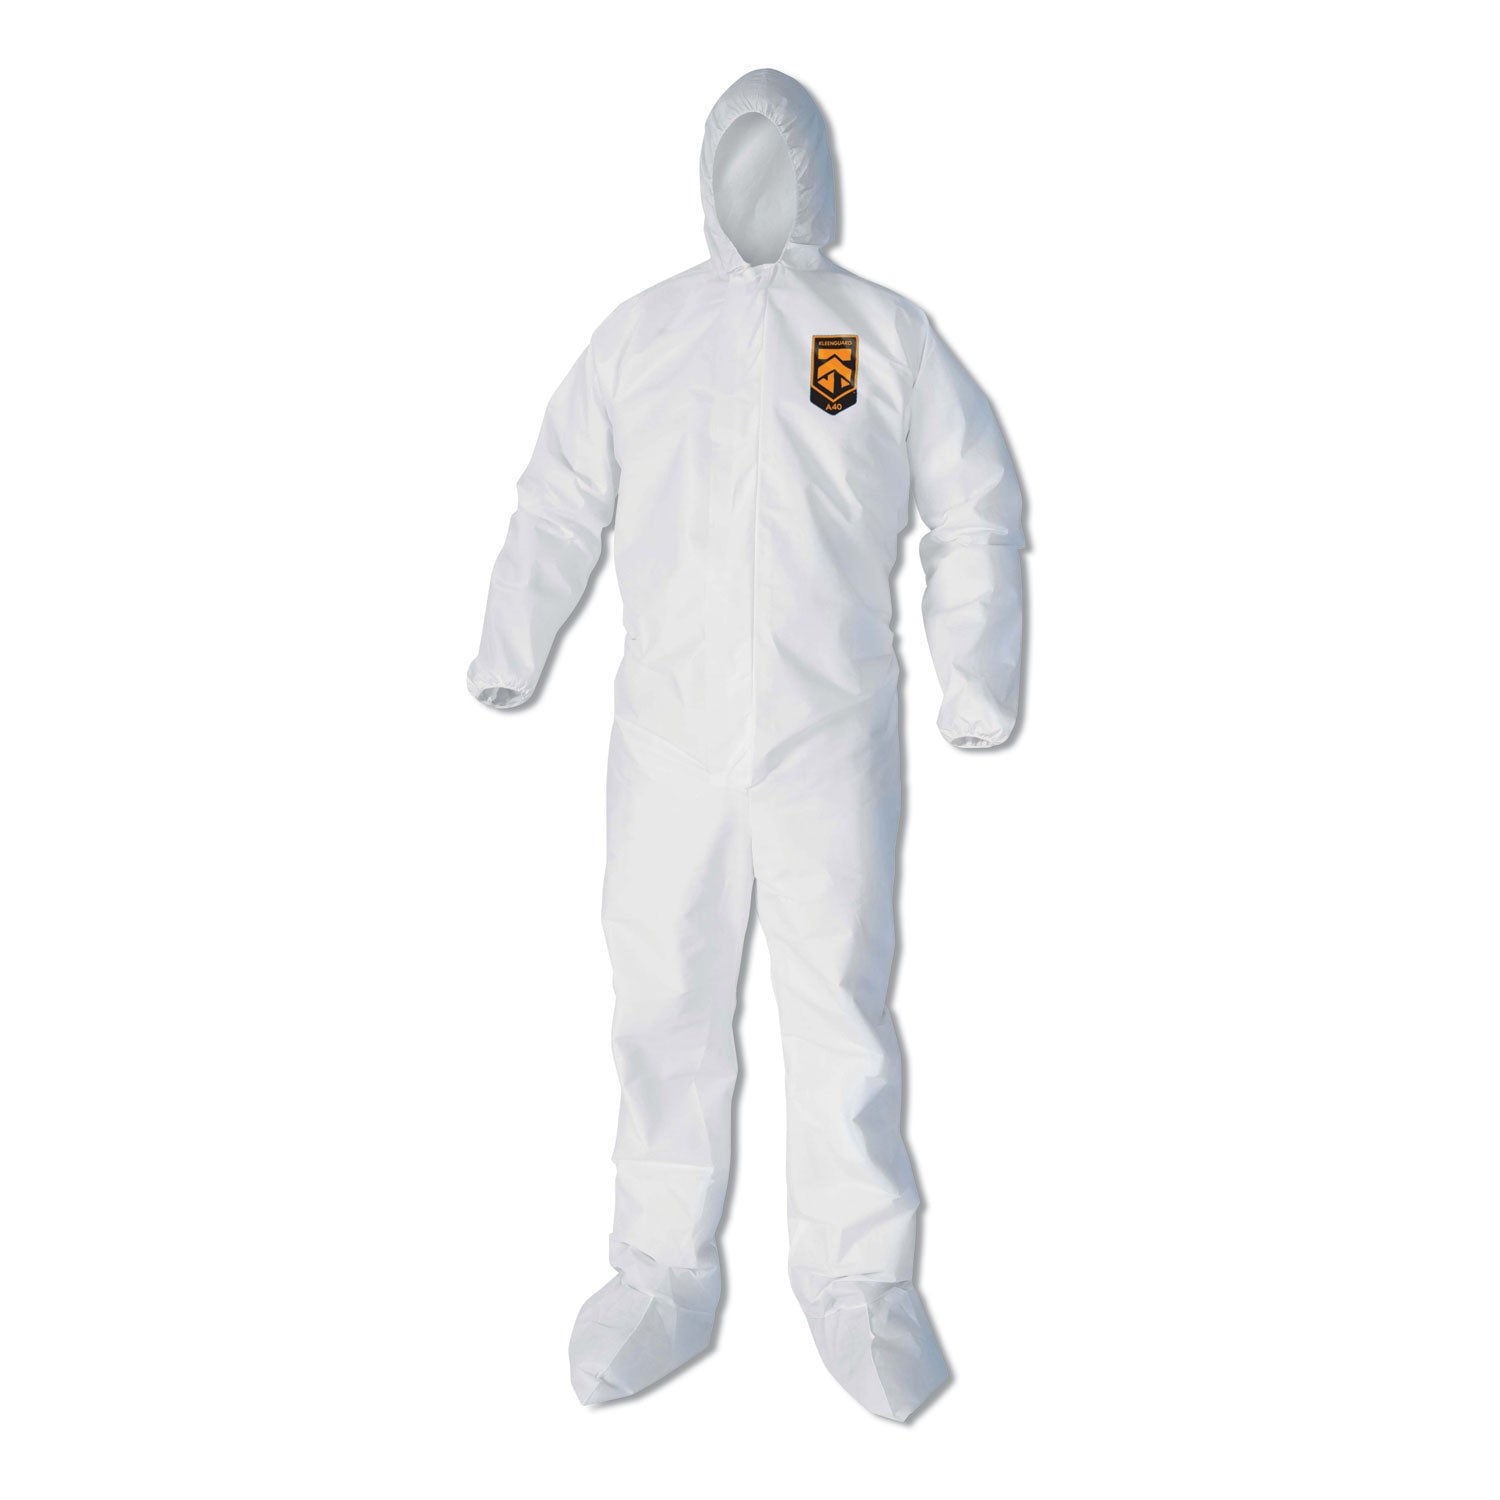 a40-elastic-cuff-ankle-hood-and-boot-coveralls-4x-large-white-25-carton_kcc44337 - 1